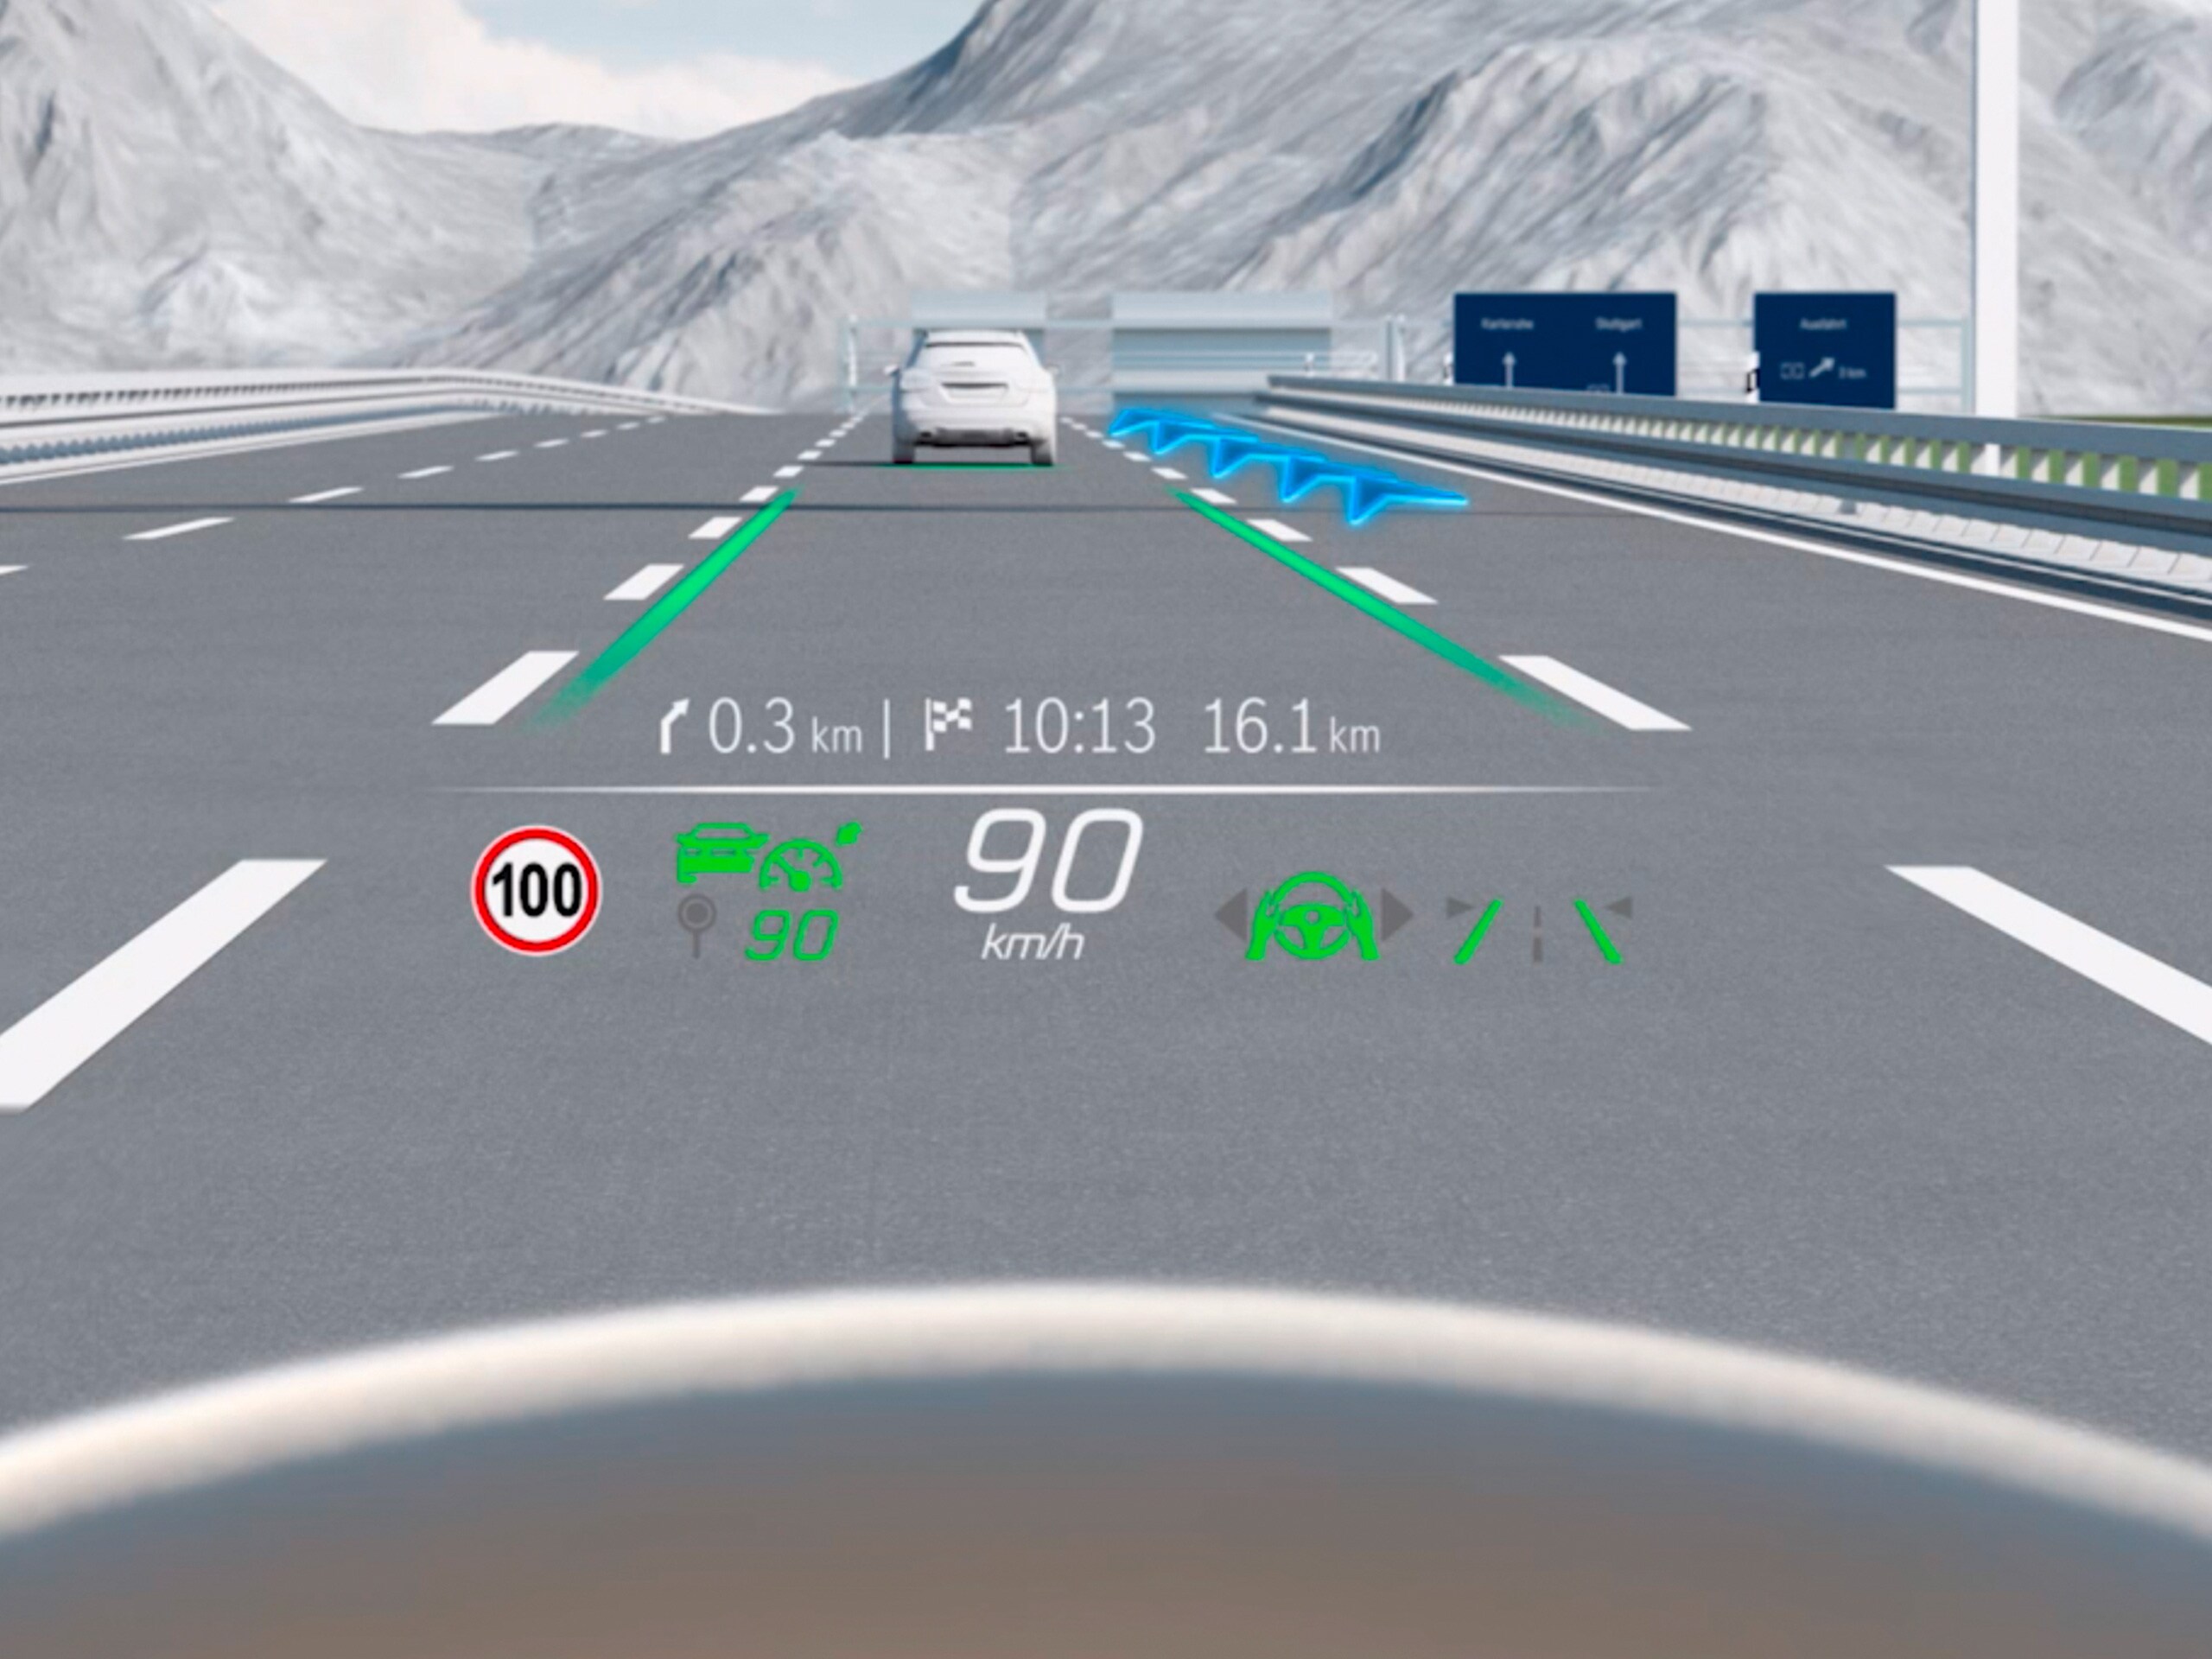 The video shows the head-up display.